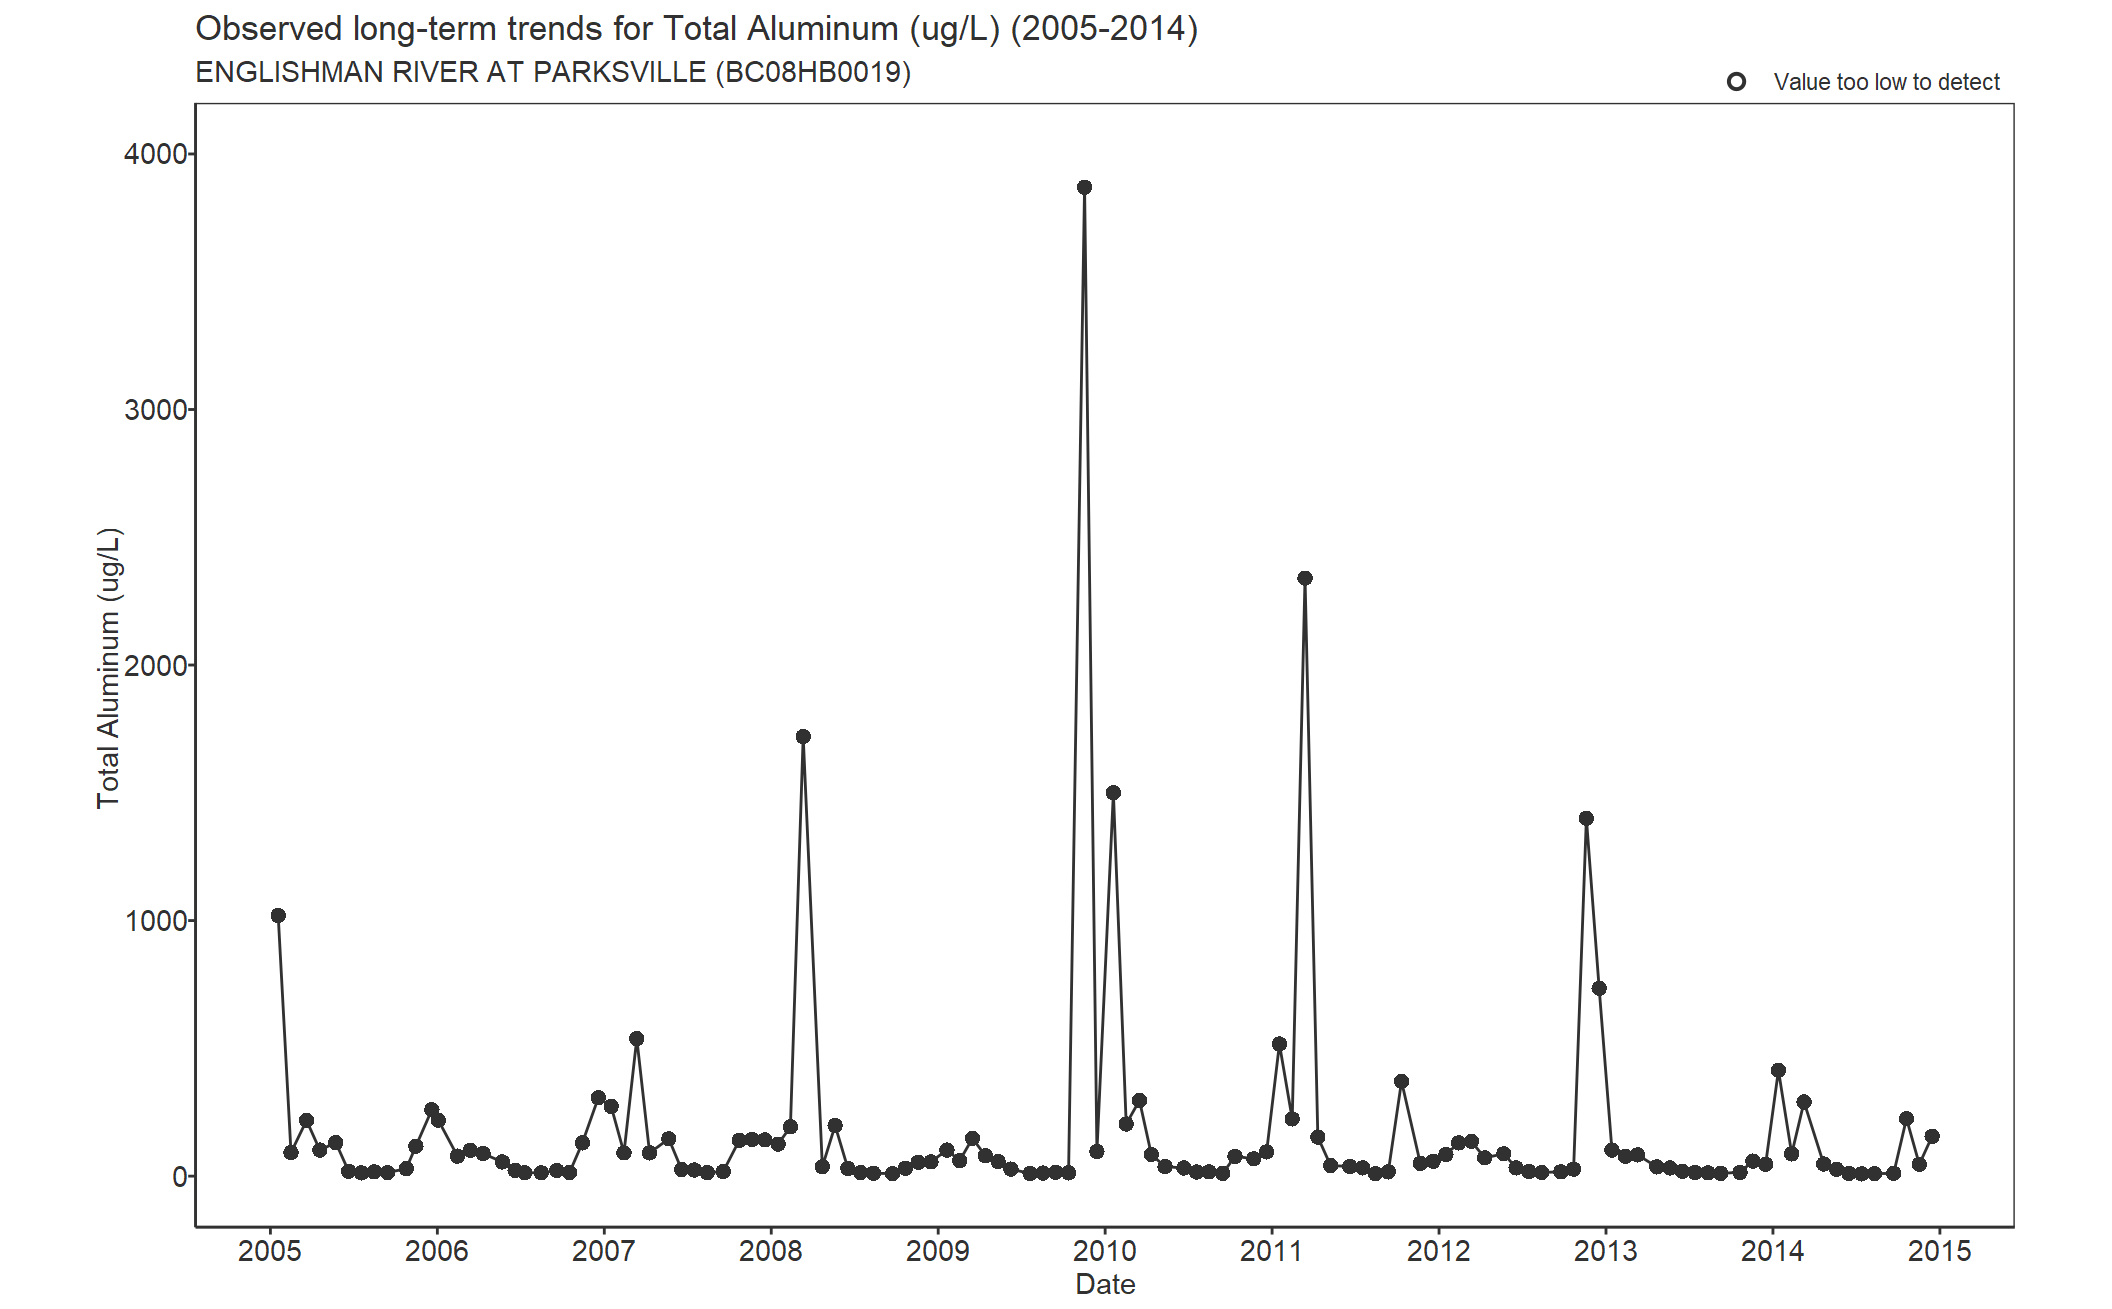 Observed long-term trends for Total Aluminum (2005-2014)